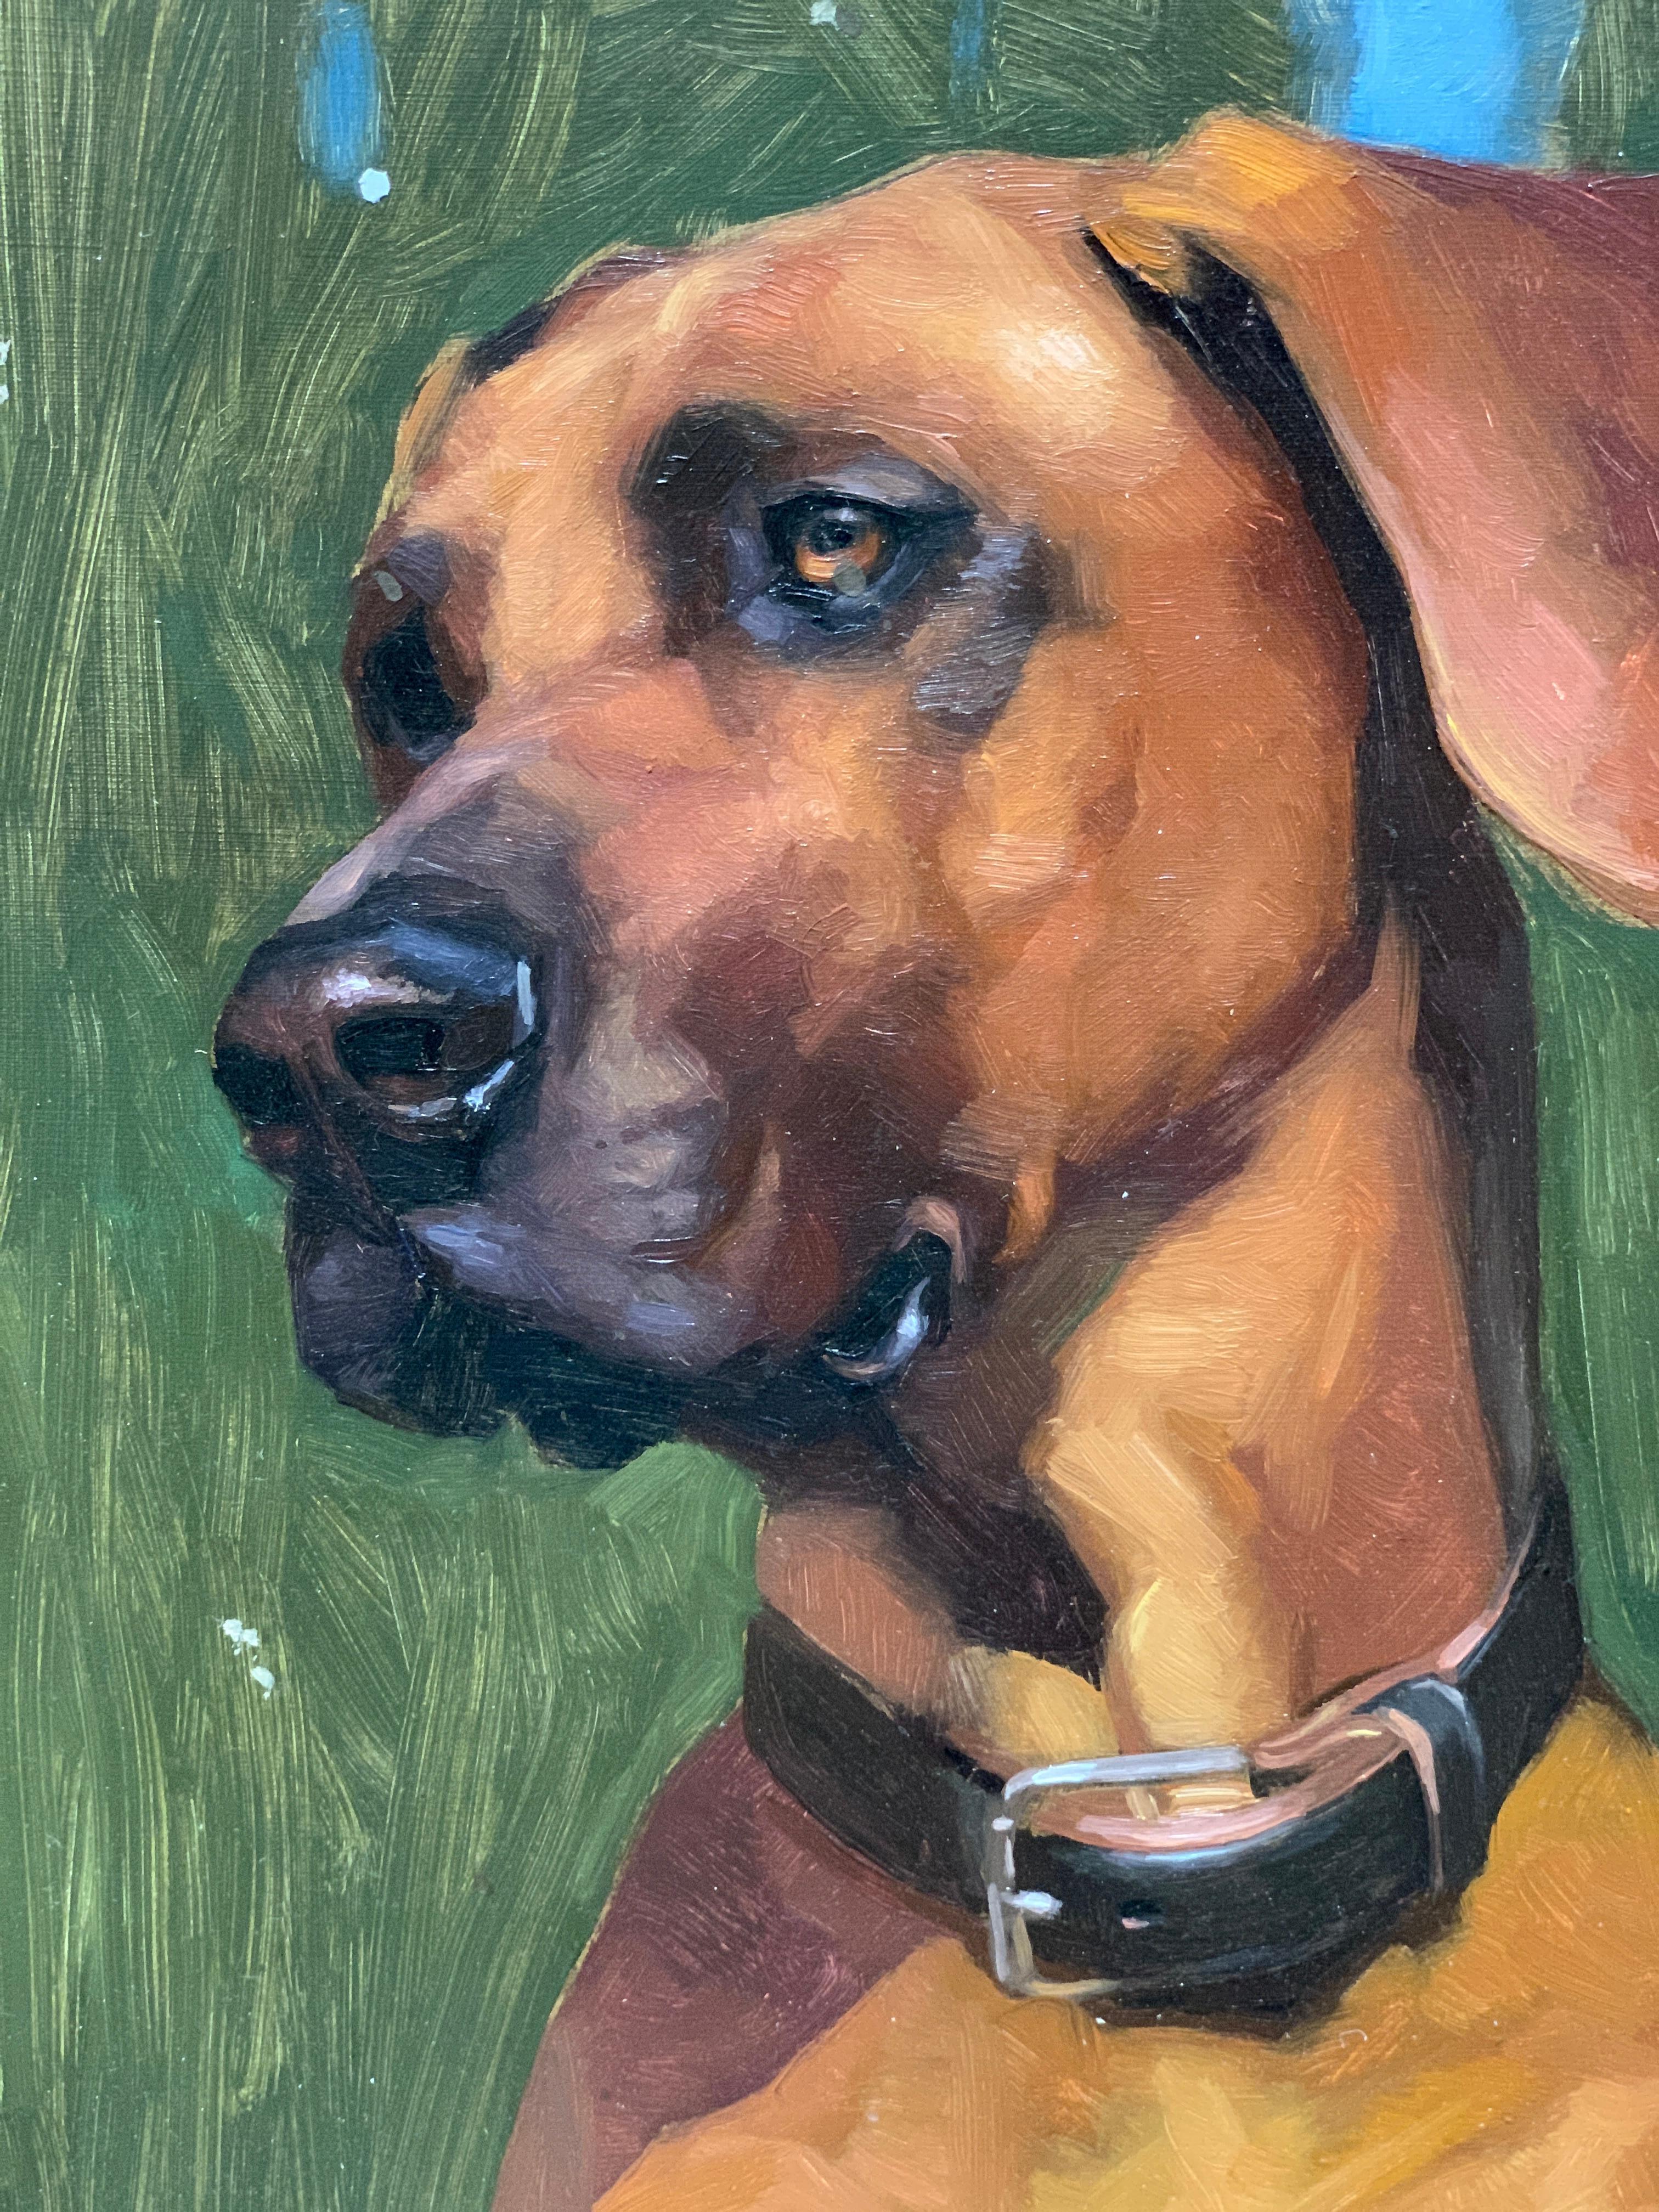 Stunning 21st century American realist portrait of a an American Boxer mix dog - Painting by Jennifer Gennari